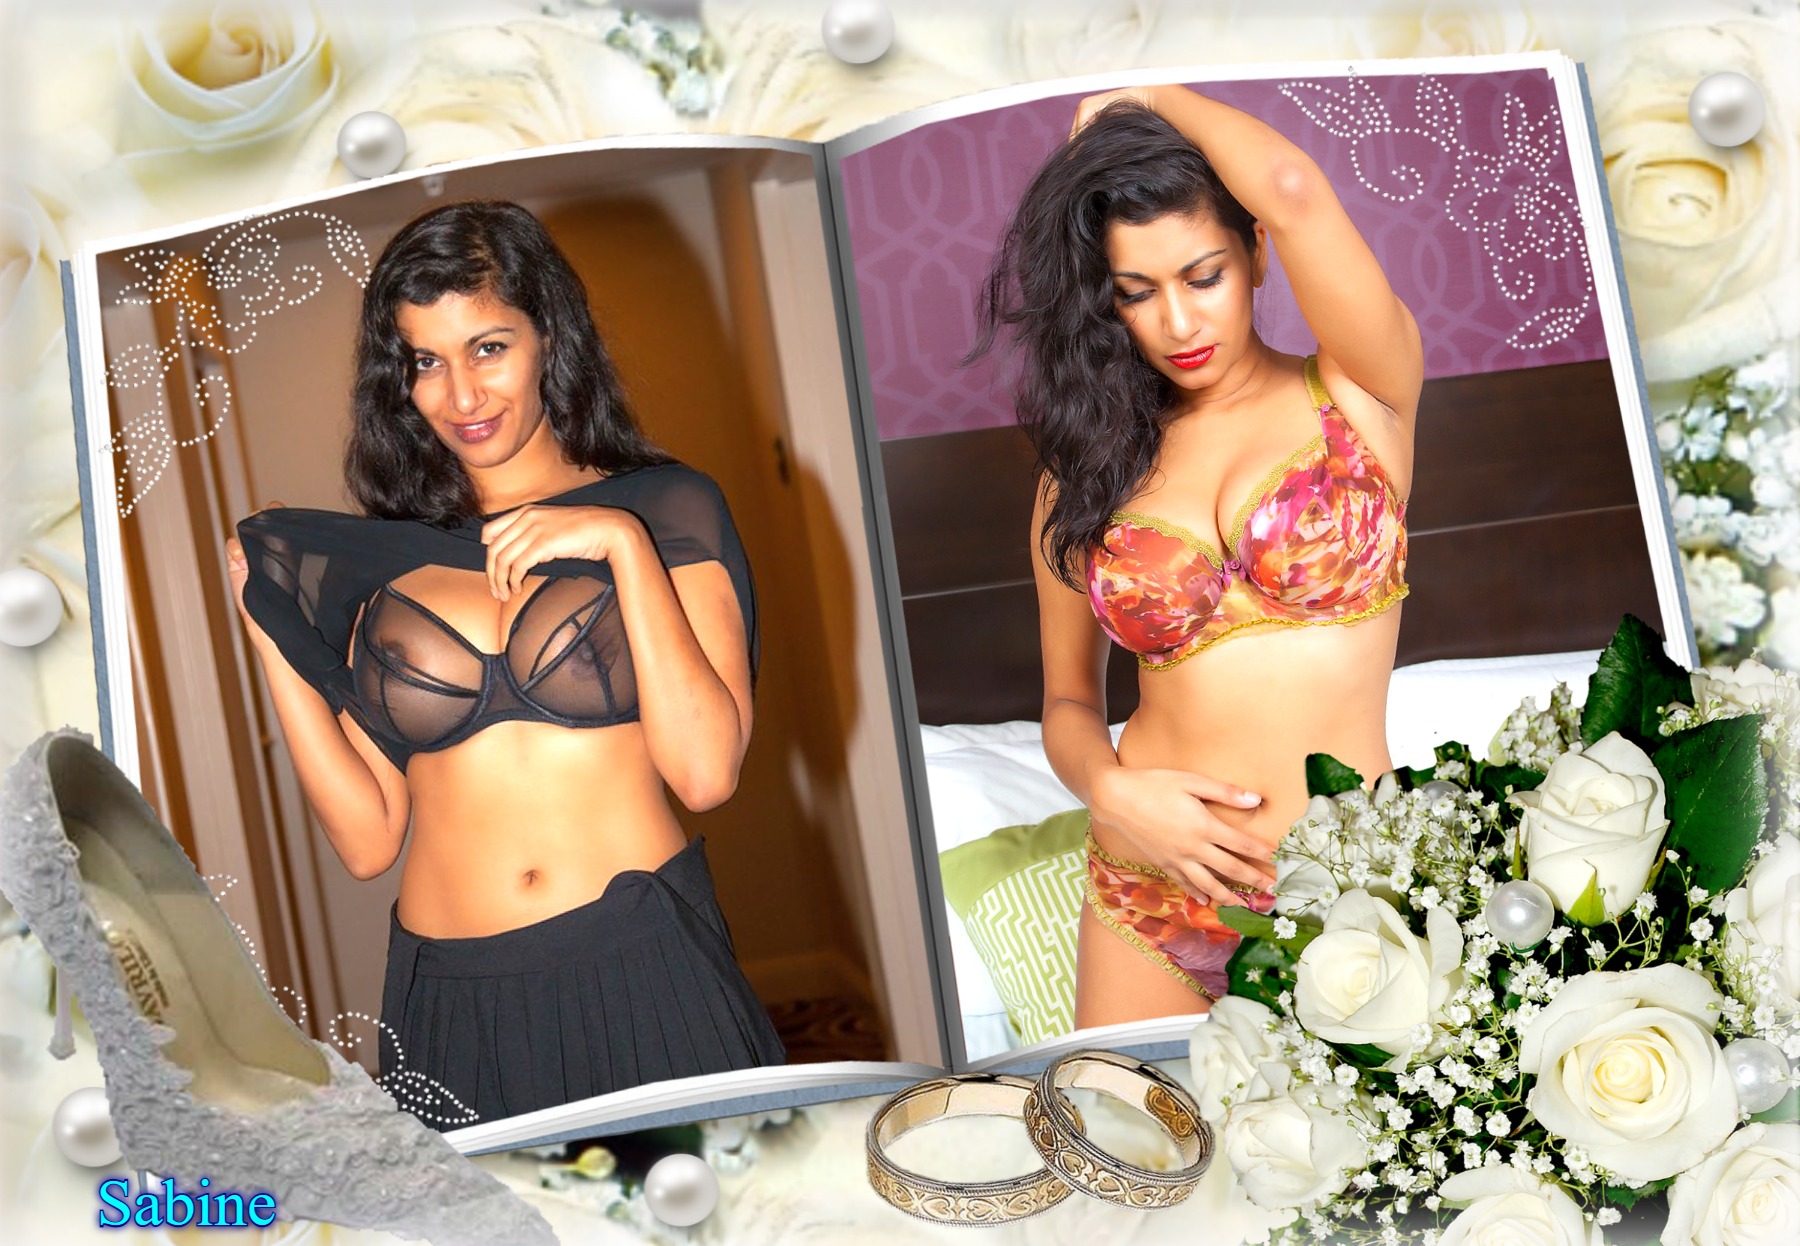 Read more about the article “Voluptuous Glam Model of Indian Descent- Sabine”